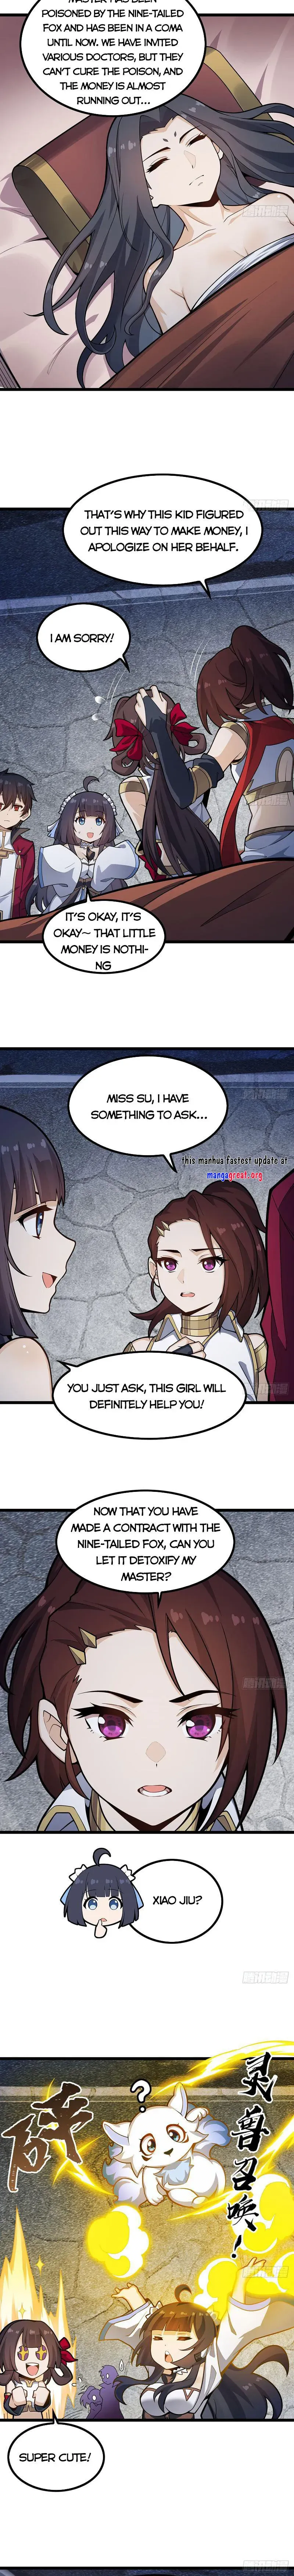 Infinite Apostles and Twelve War Girls Chapter 333 page 7